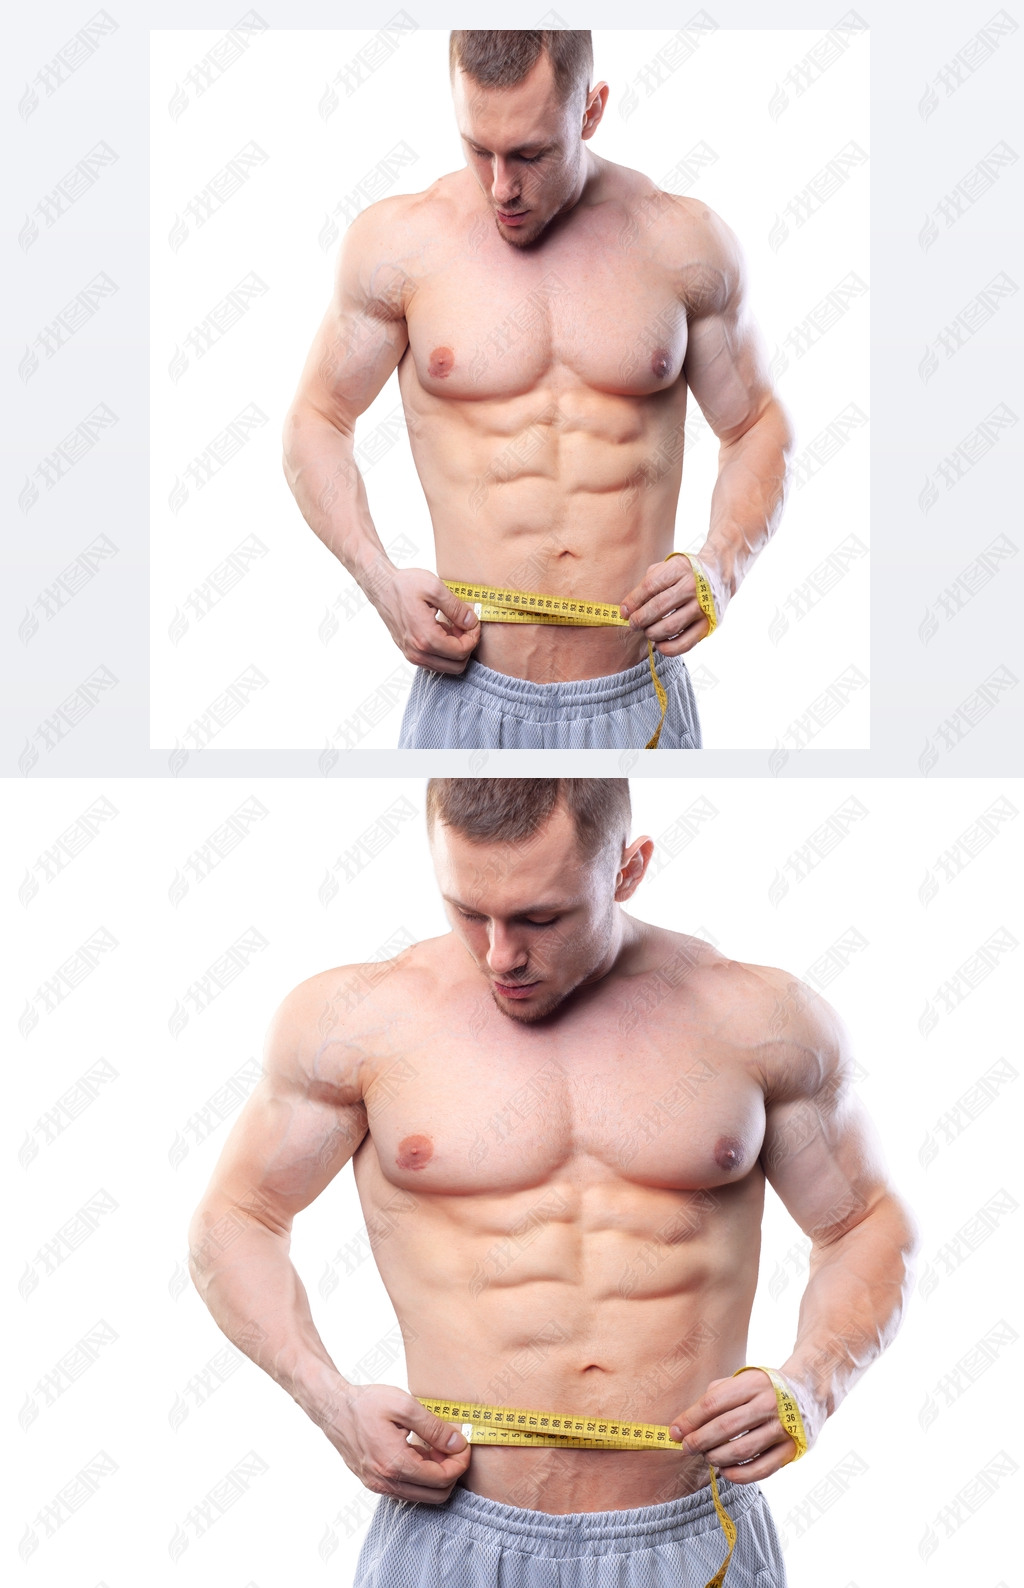 Image of muscular man measure his waist with measuring tape in centimeters. Shot isolated on white b